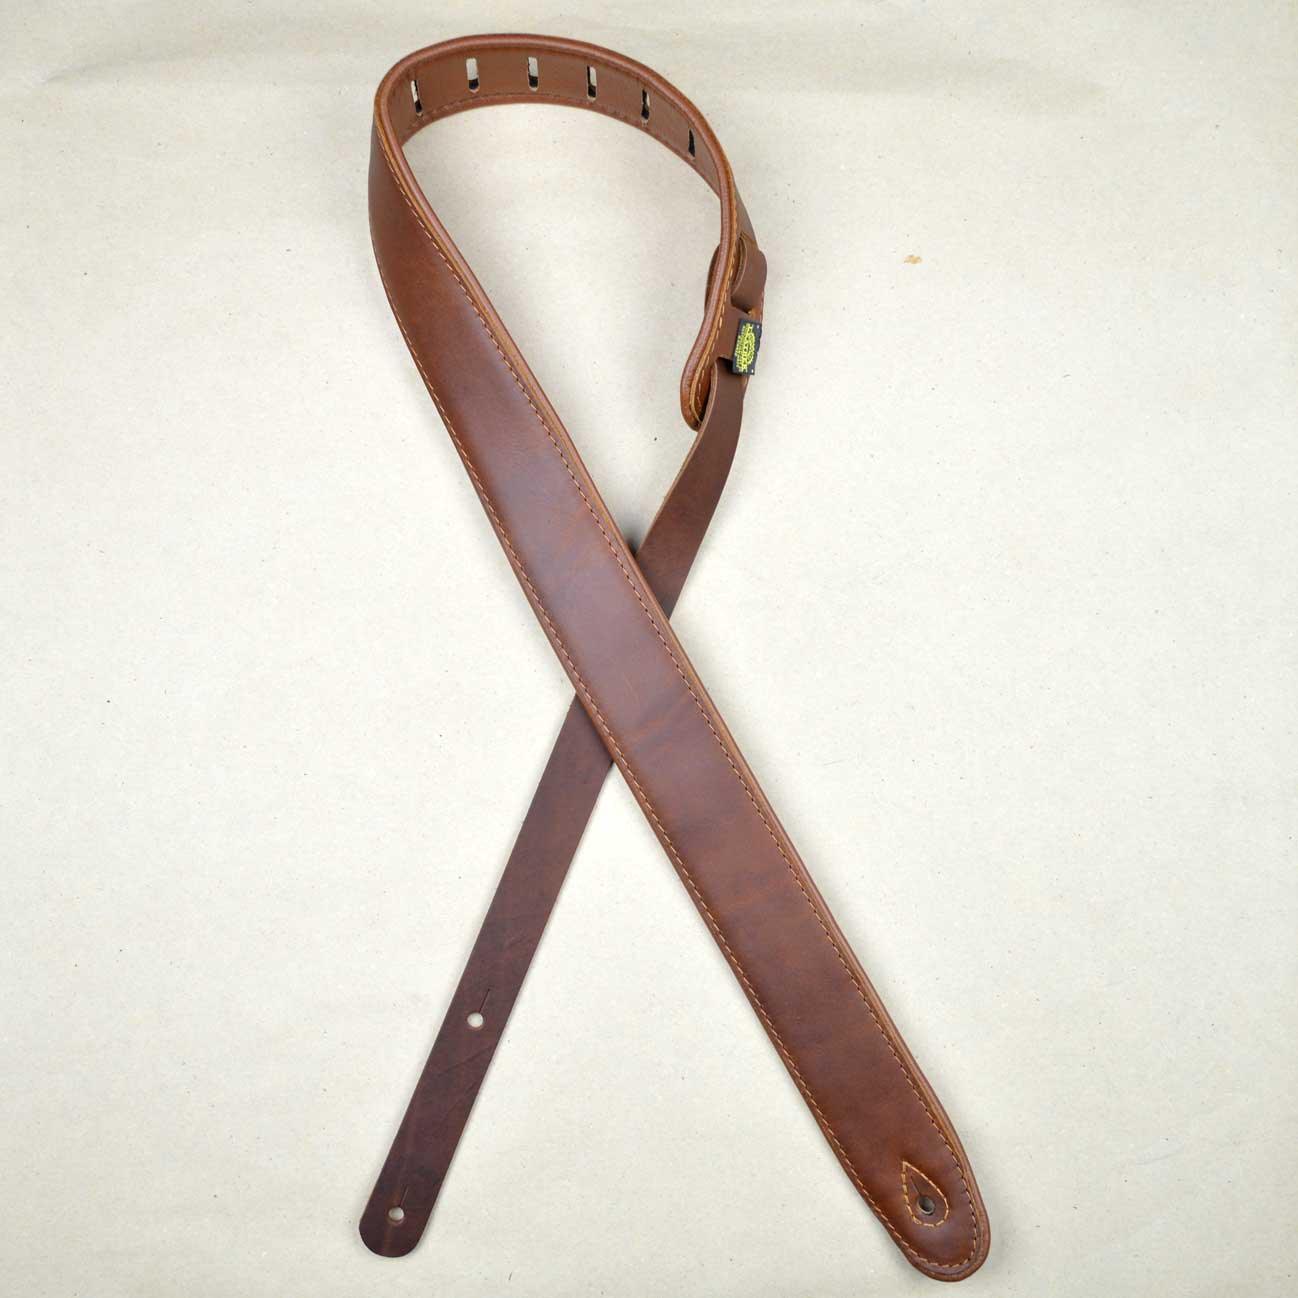 2″ Padded Upholstery Leather Guitar Strap Brown & Tan - Straps by Colonial Leather at Muso's Stuff